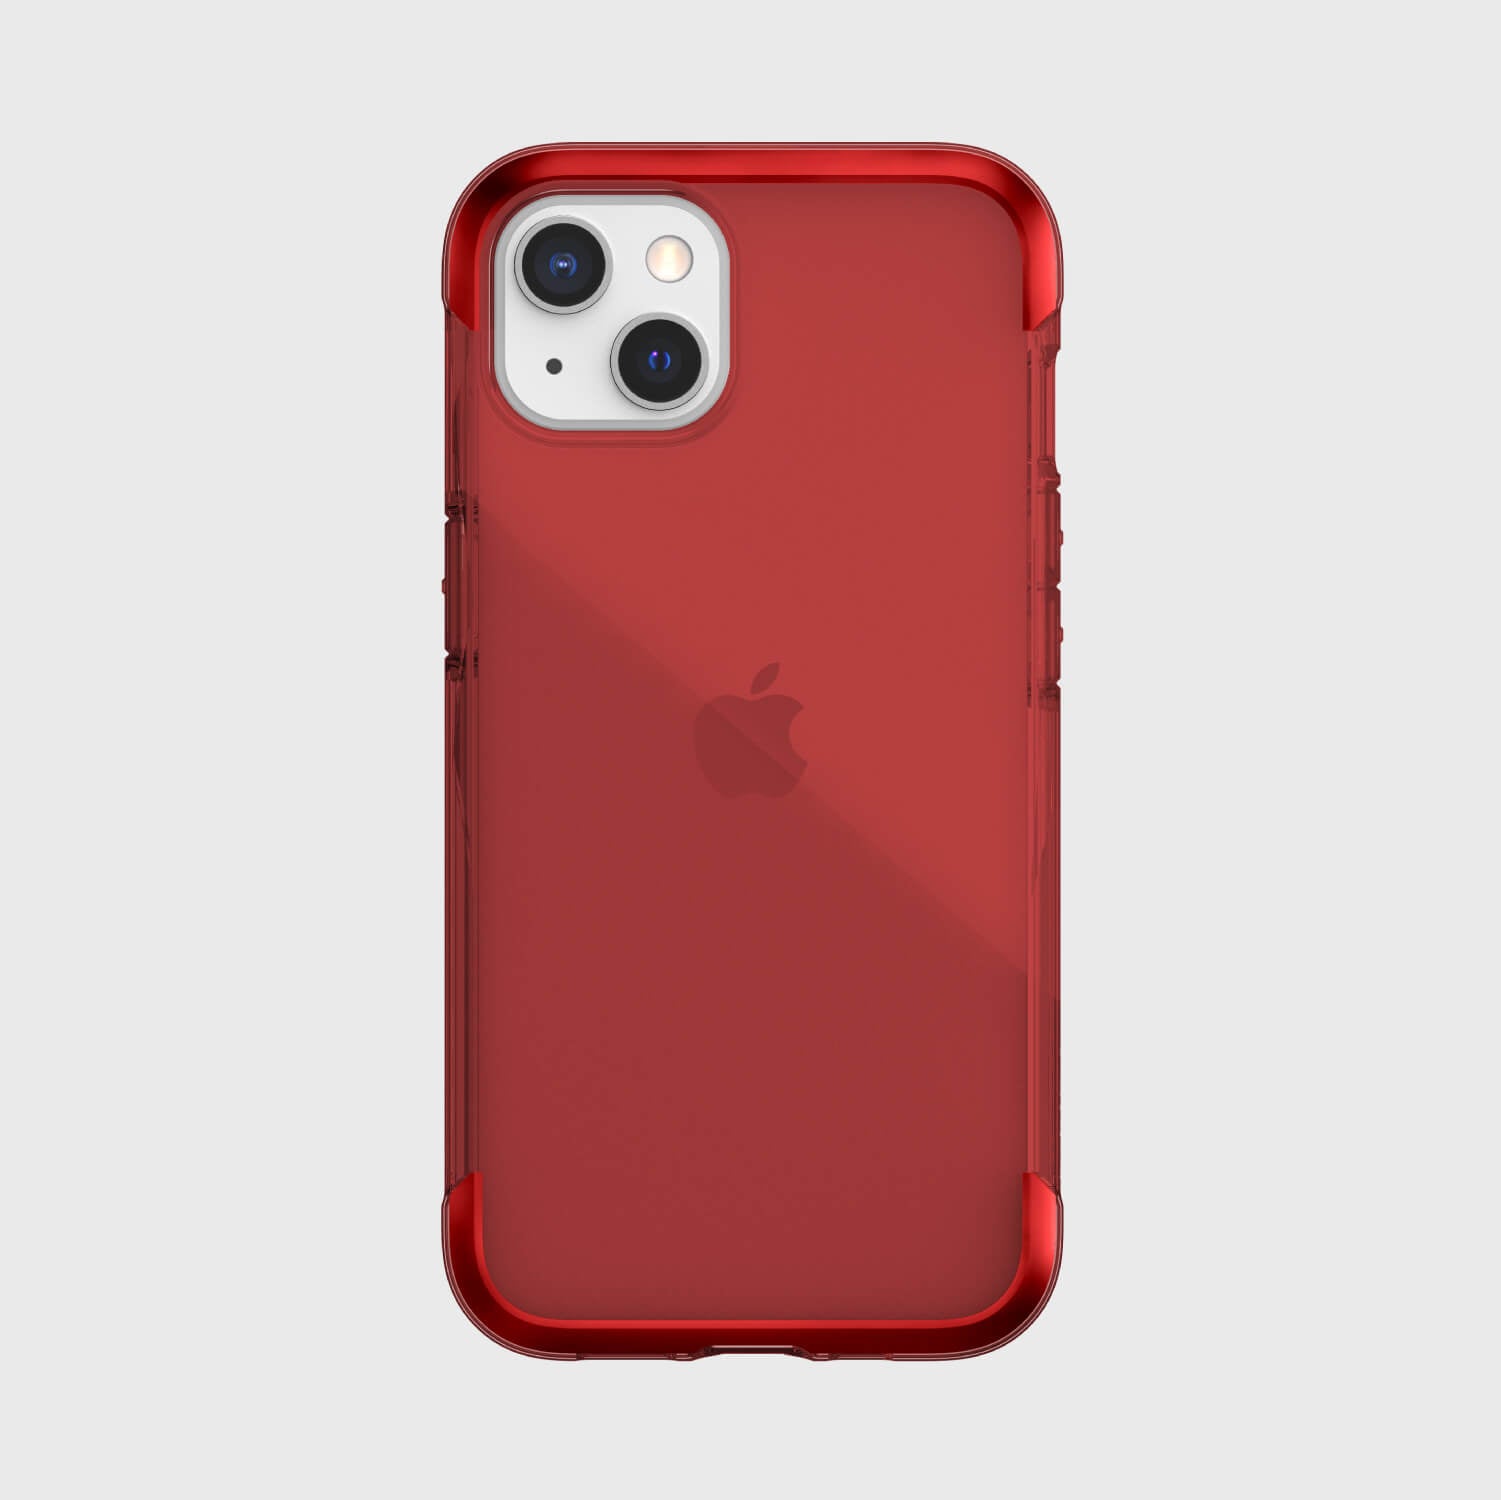 The red iPhone 13 Case - AIR, drop proof and wireless charging compatible, is shown on a white background.